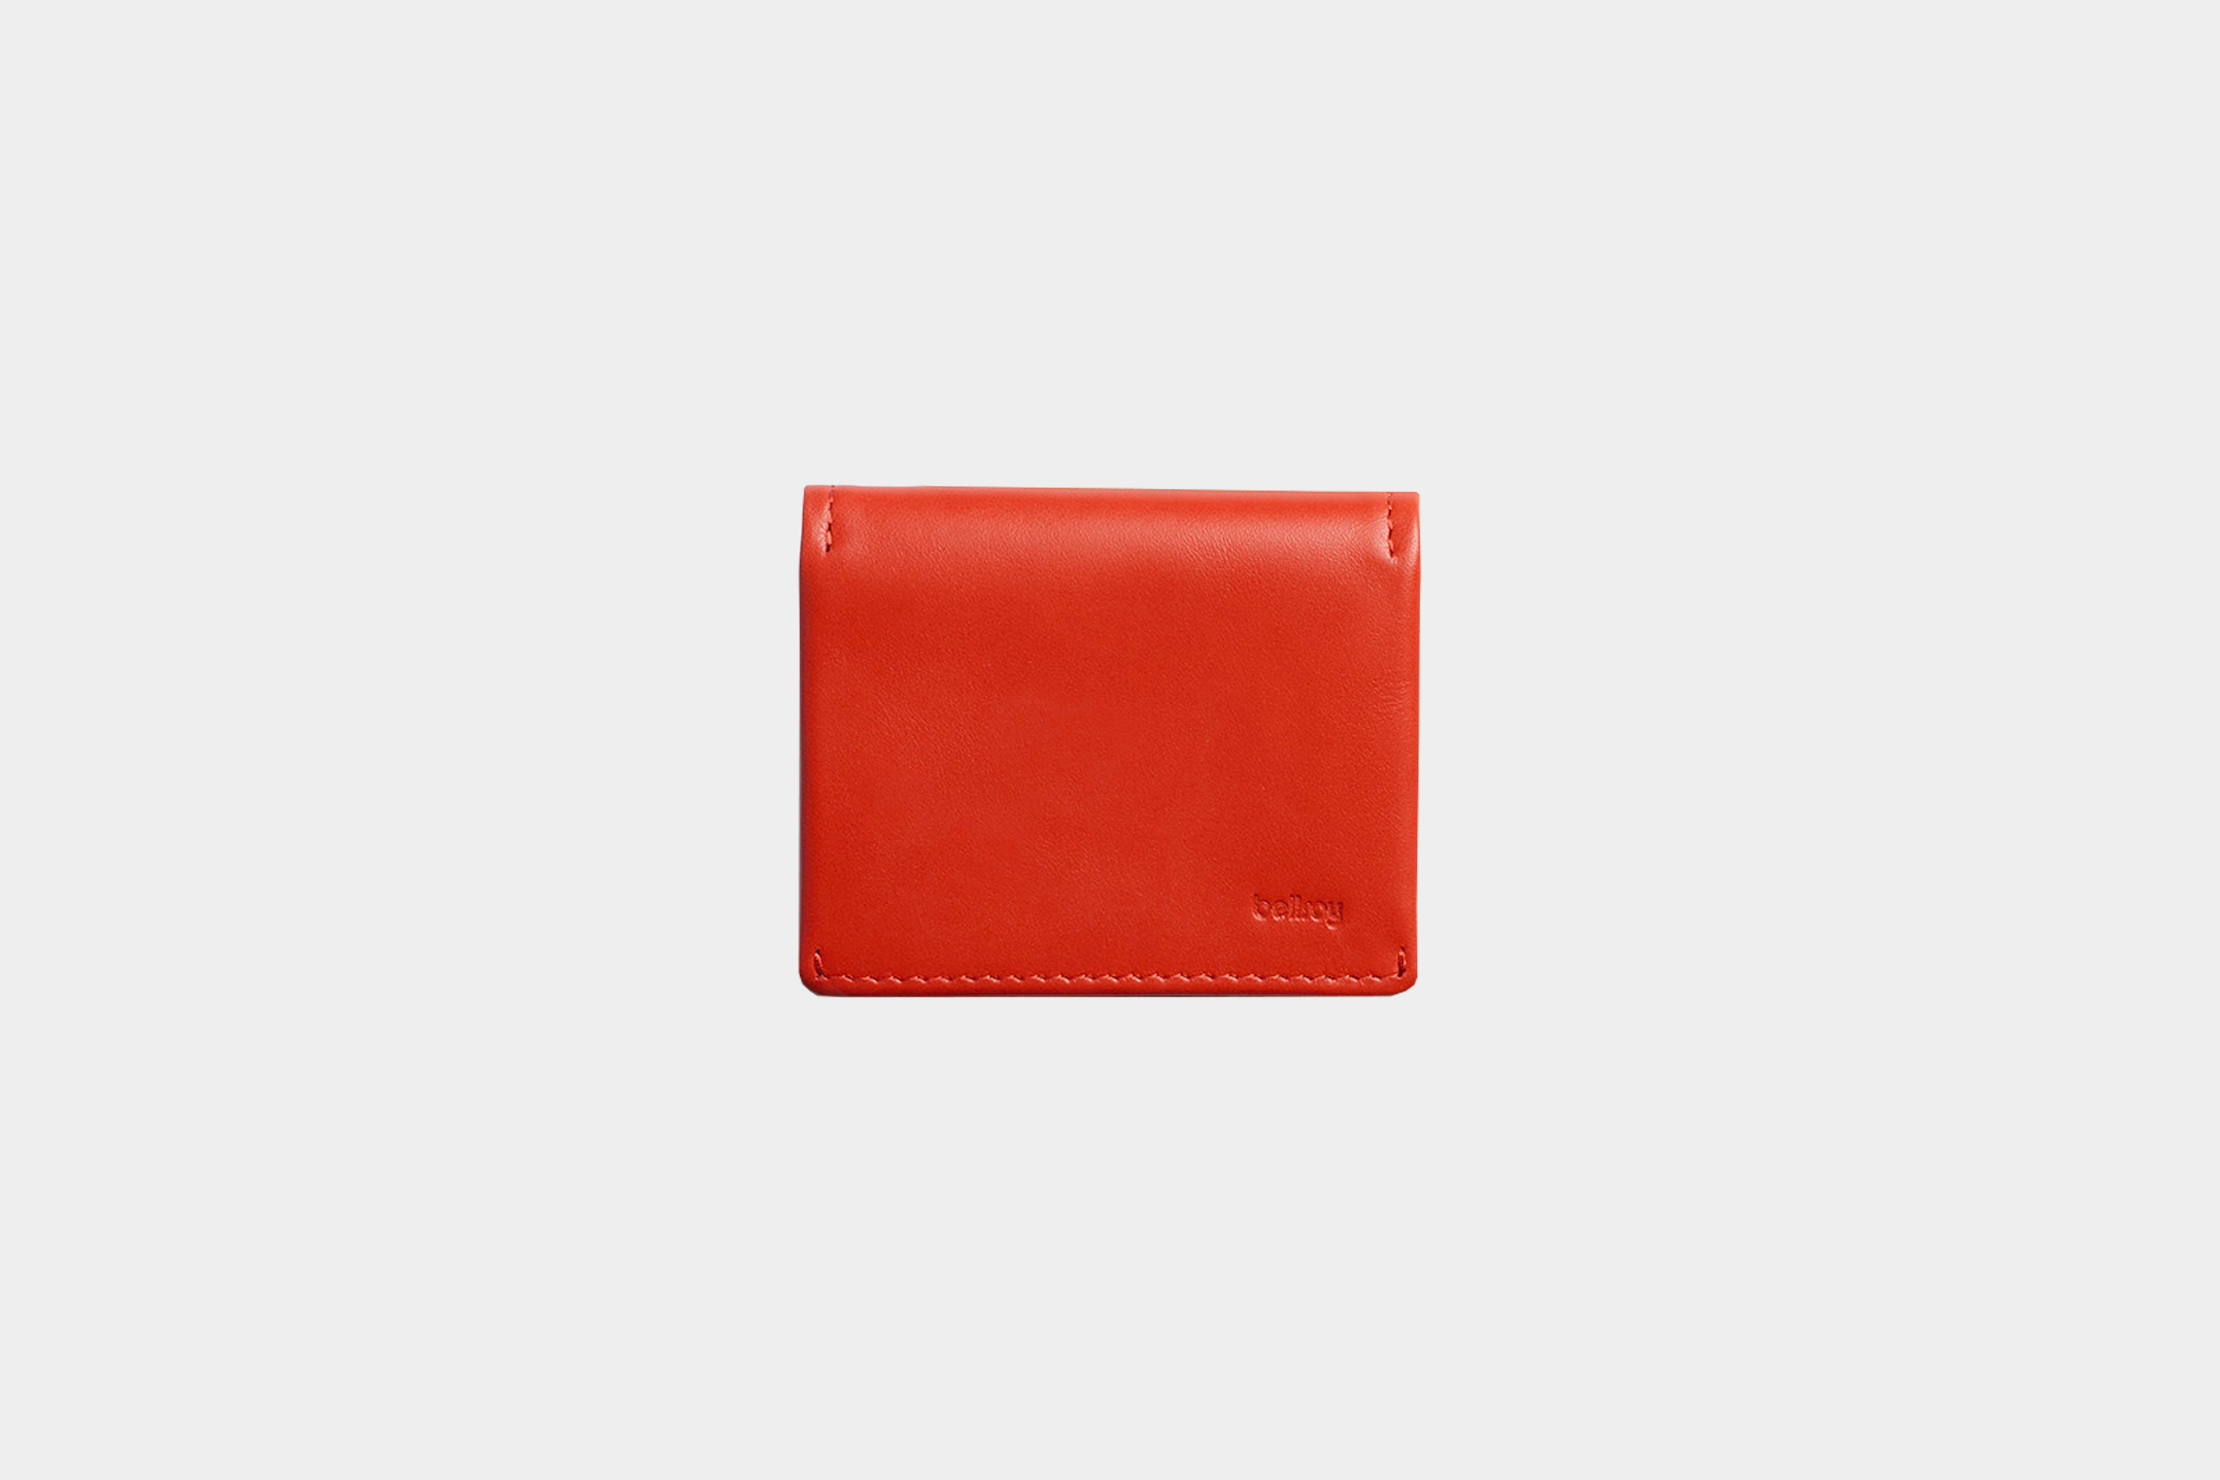 Bellroy Slim Sleeve Wallet Review 2023 - Forbes Vetted